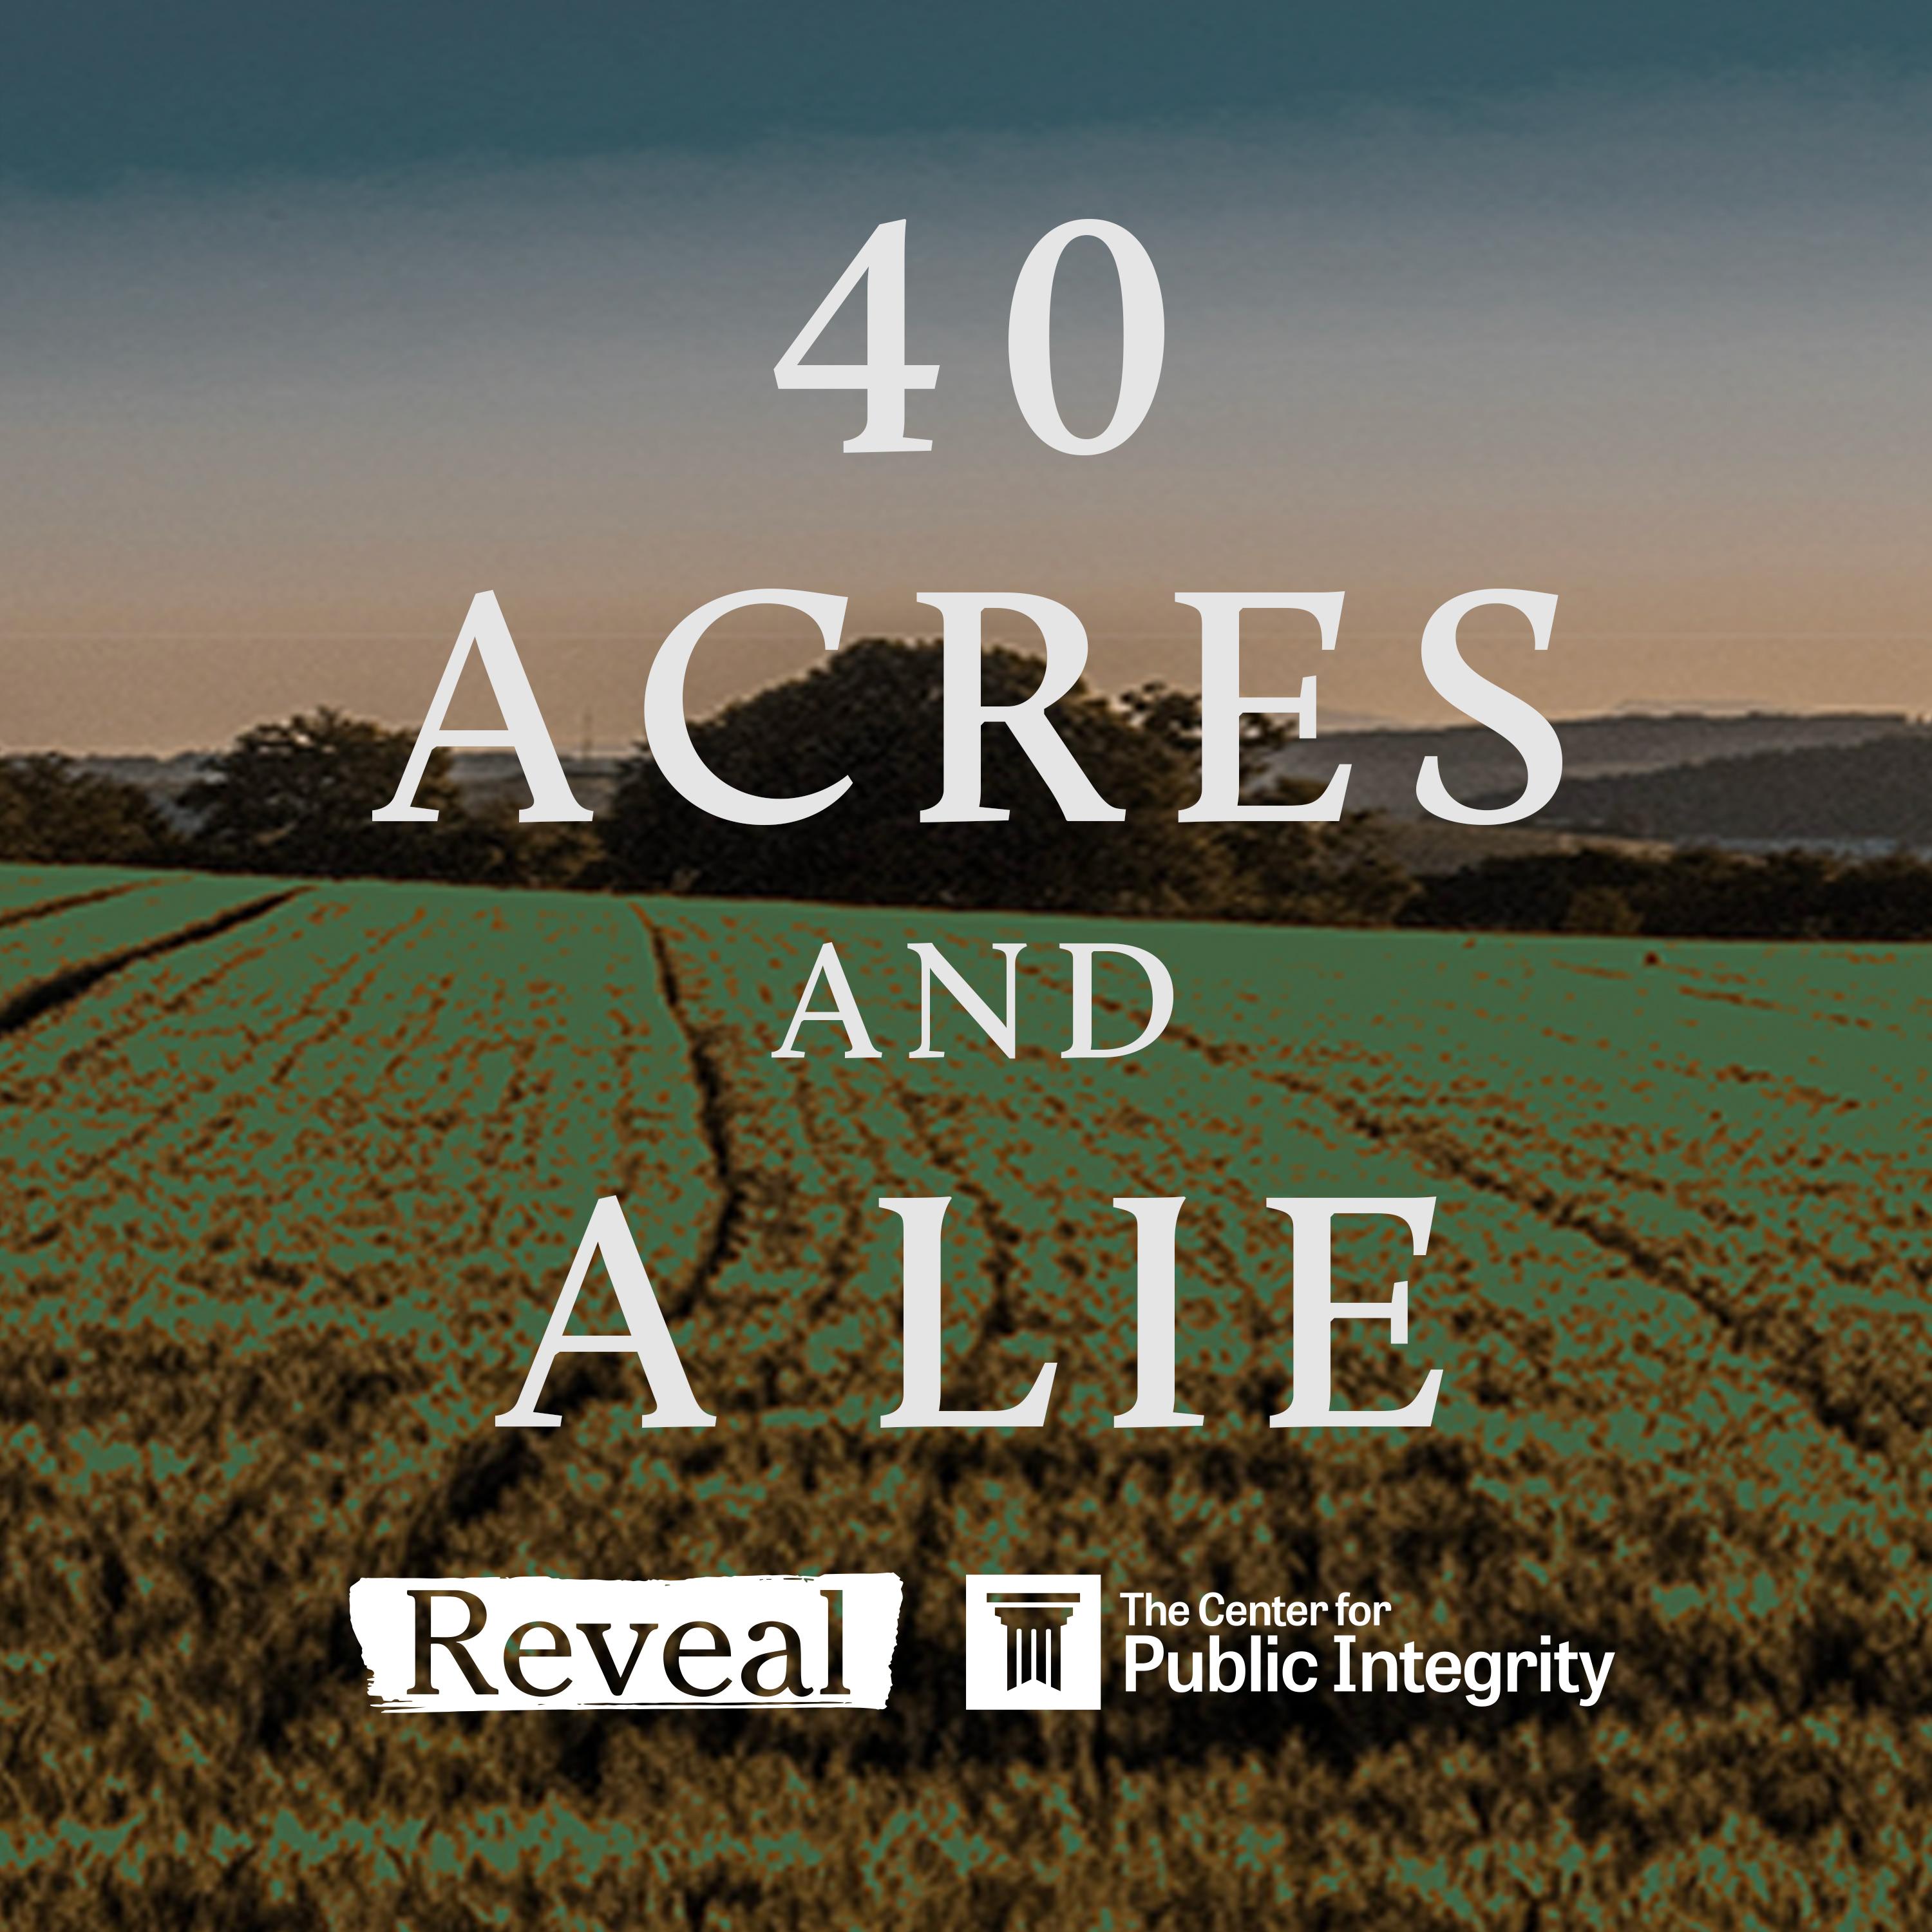 Thumbnail for "40 Acres and a Lie Part 1".